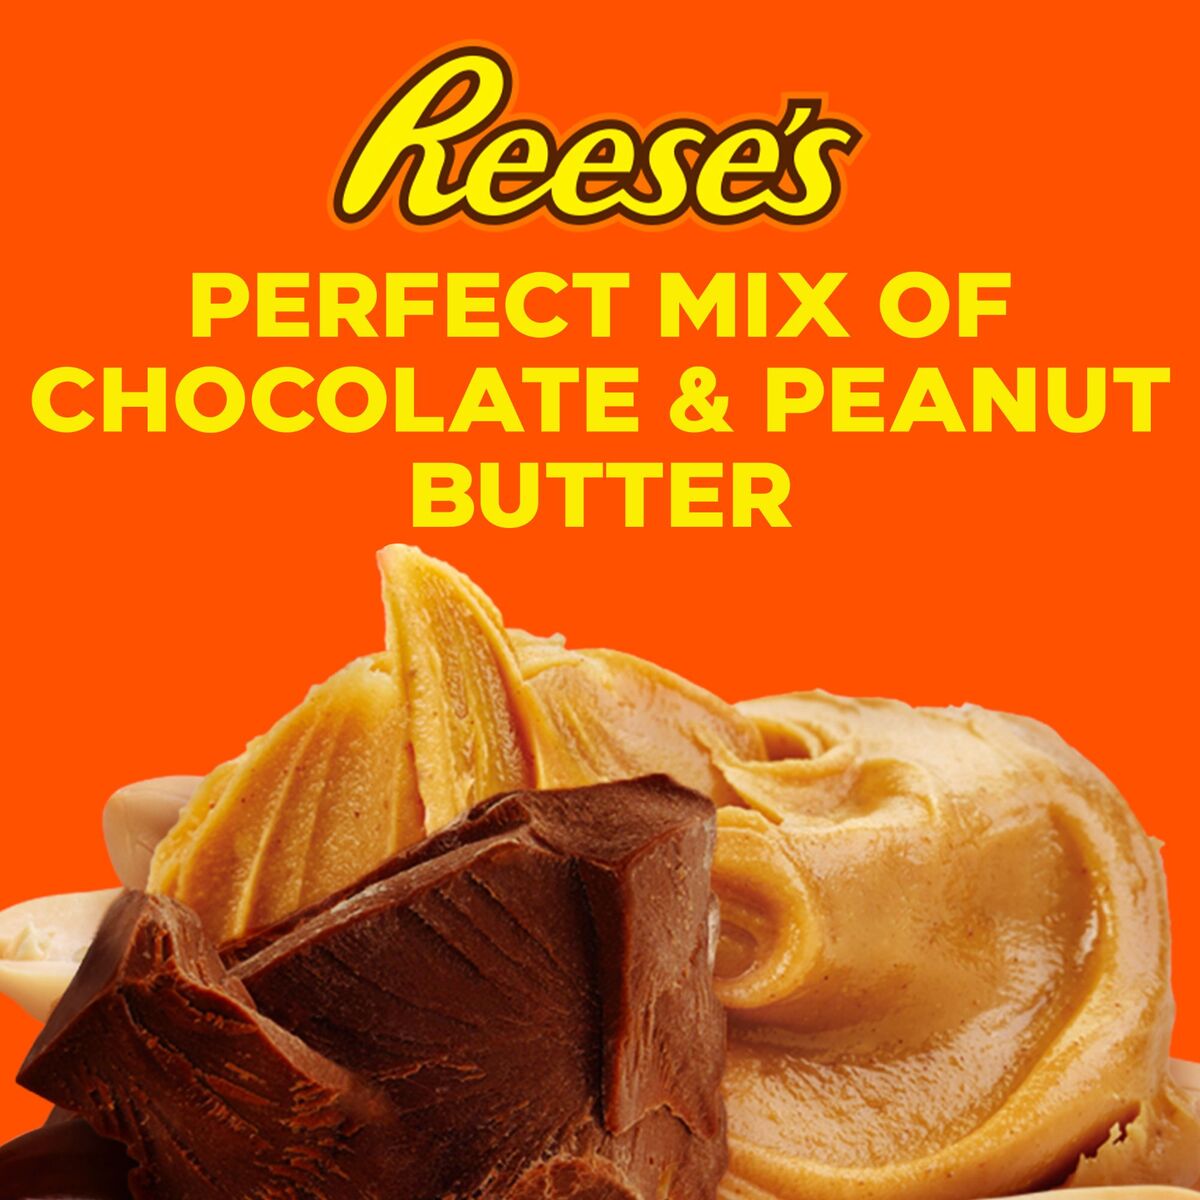 Reese's Mini Unwrapped Chocolate Peanut Butter Cups 215 g